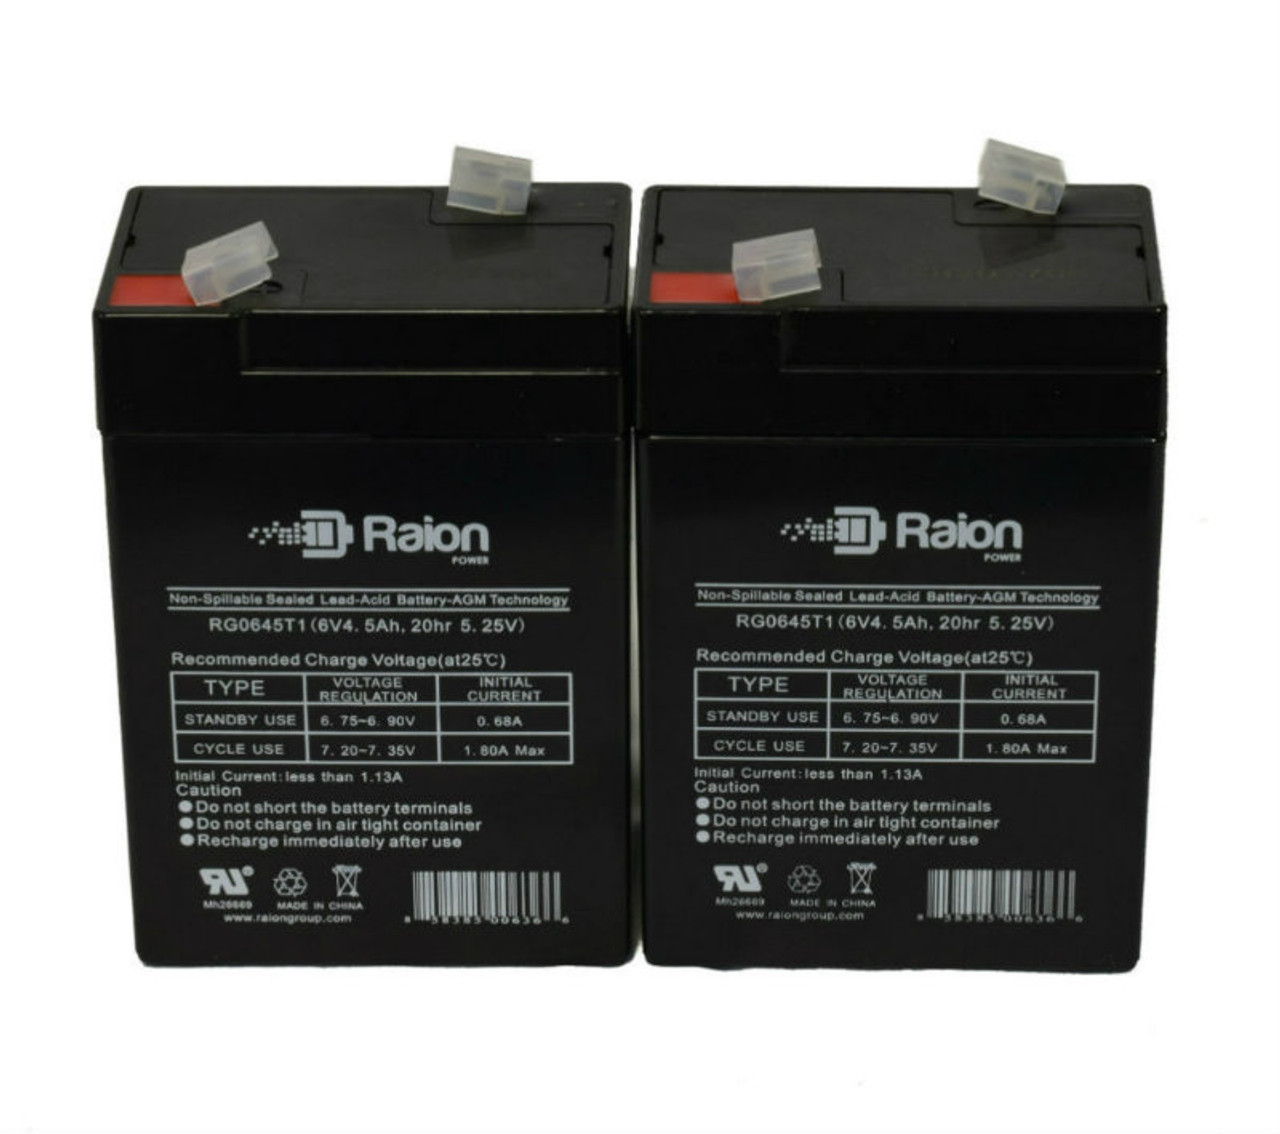 Raion Power RG0645T1 6V 4.5Ah Replacement Battery Cartridge for TOBBI 12V Kid Ride on Truck W/ Parental Remote Control - 2 Pack